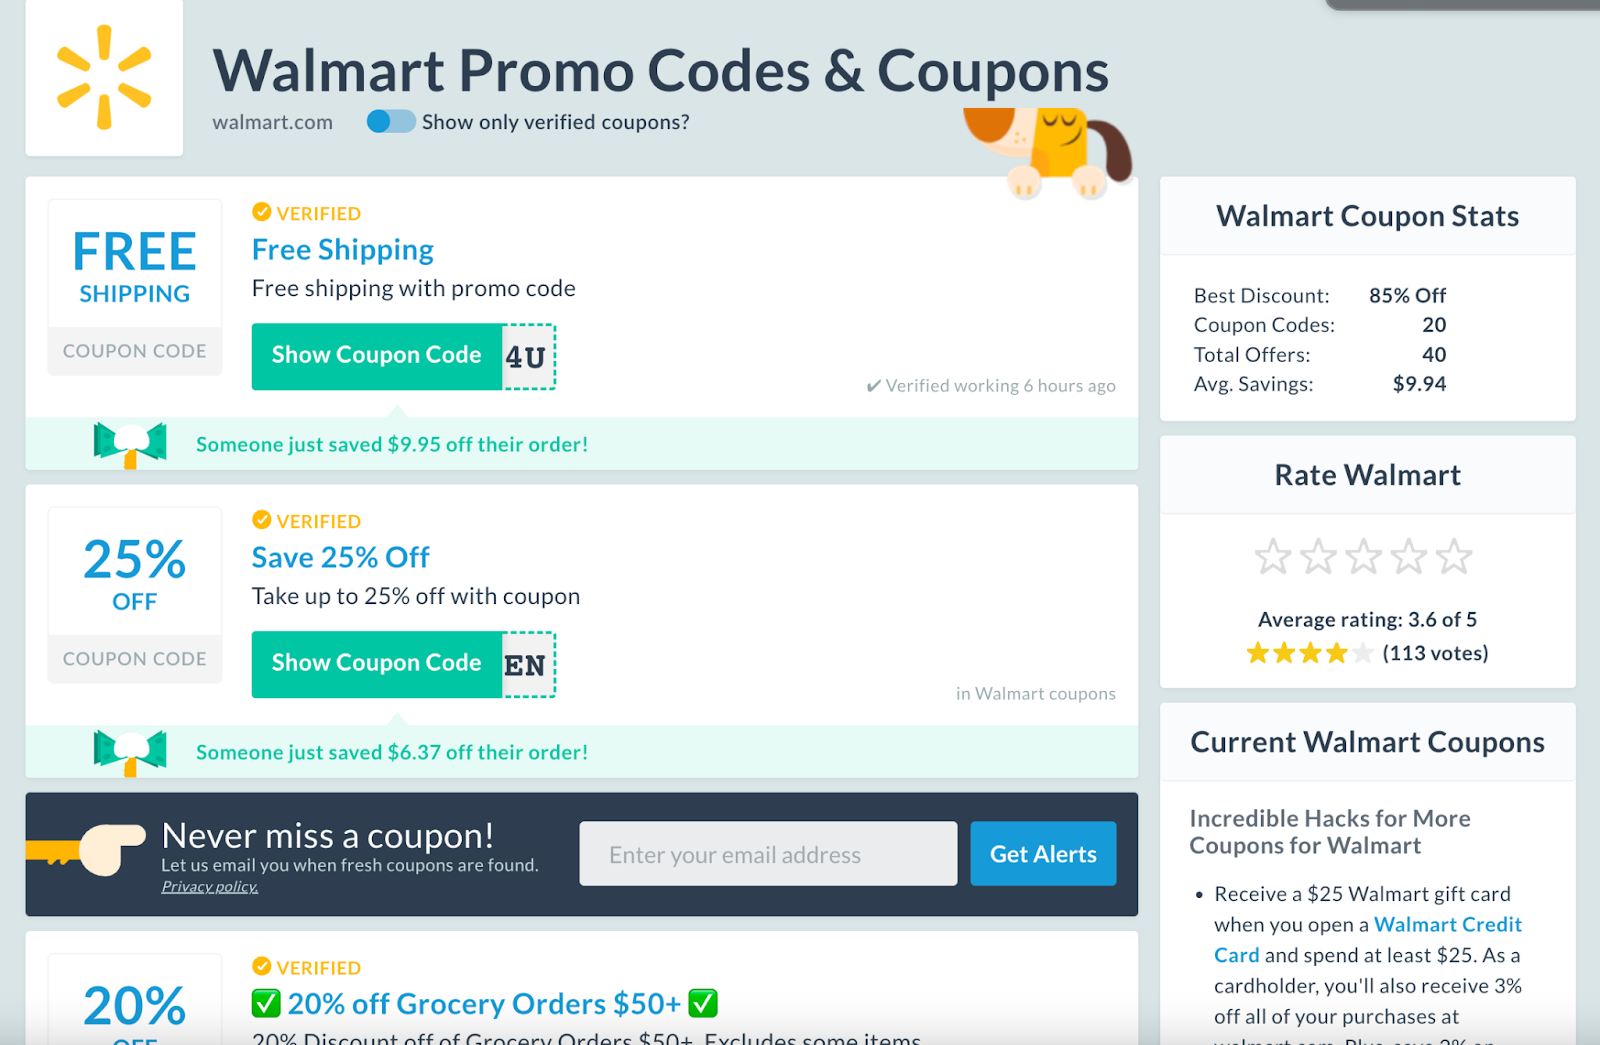 Walmart promo codes listed on CouponFollow